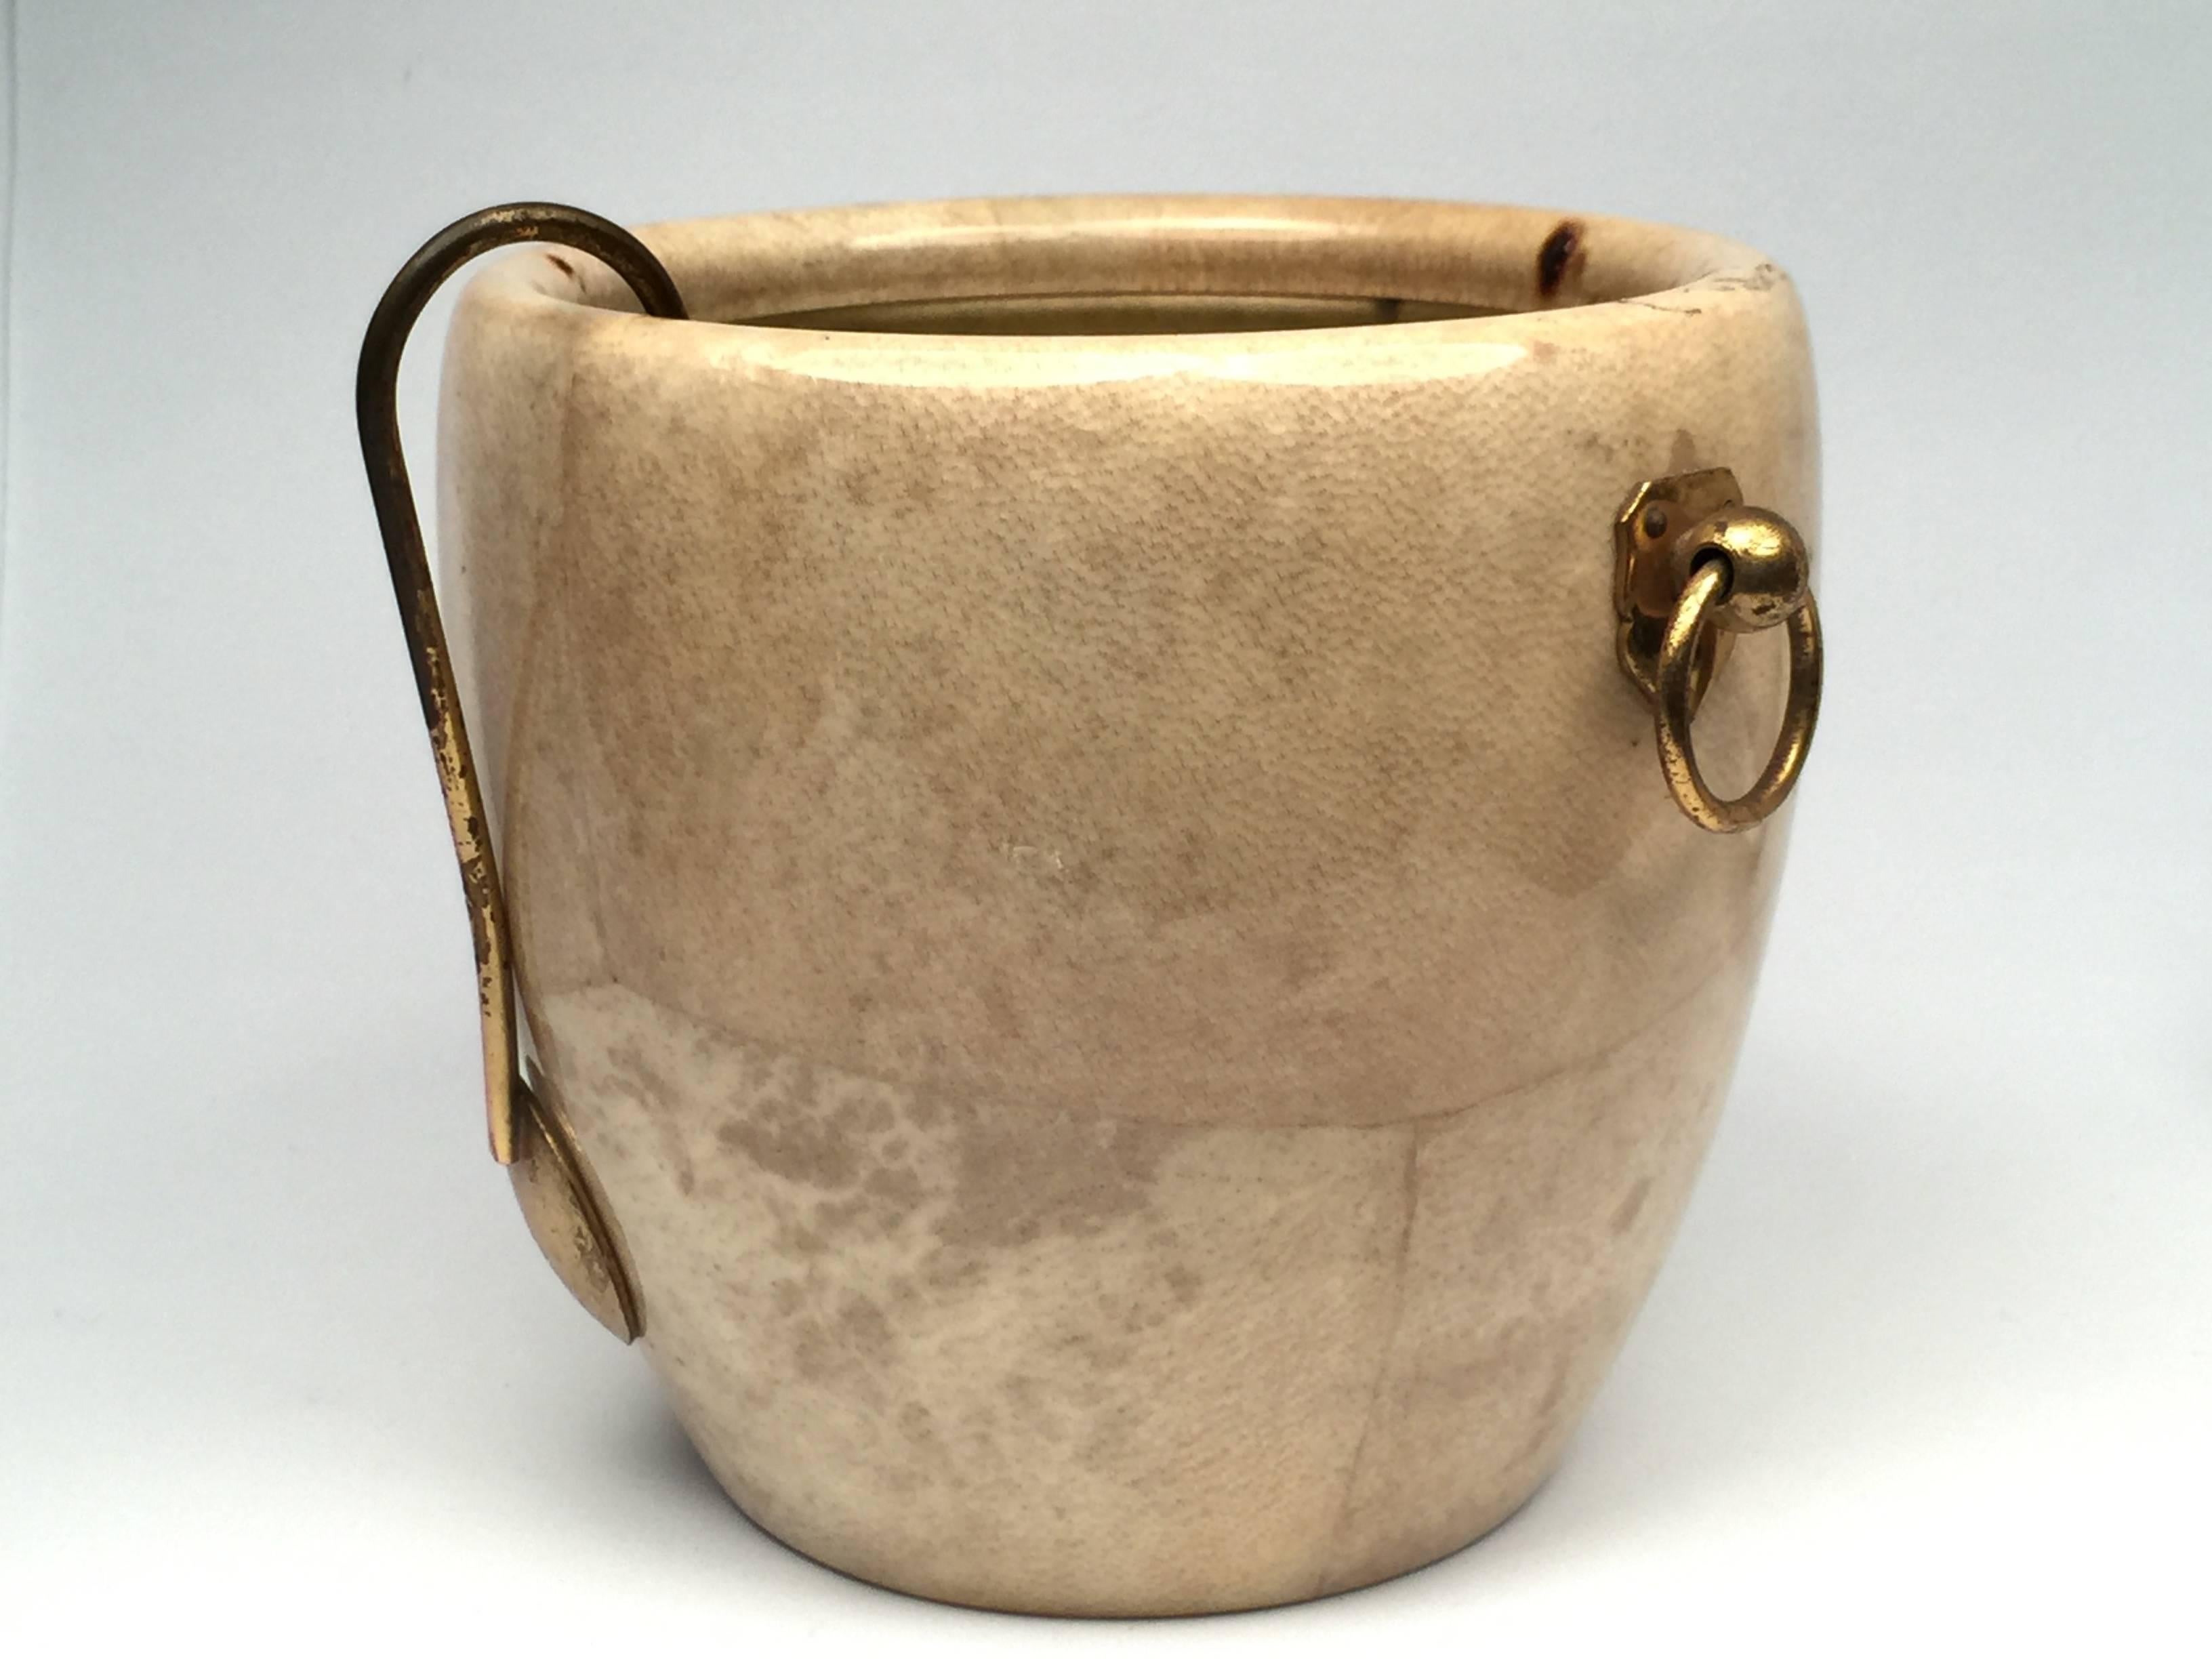 Vintage Aldo Tura beige goatskin and brass ice bucket
1940s made in Italy.

This piece is in good vintage condition with porous grains on the brass details.

An amazing and seldom piece in this condition.